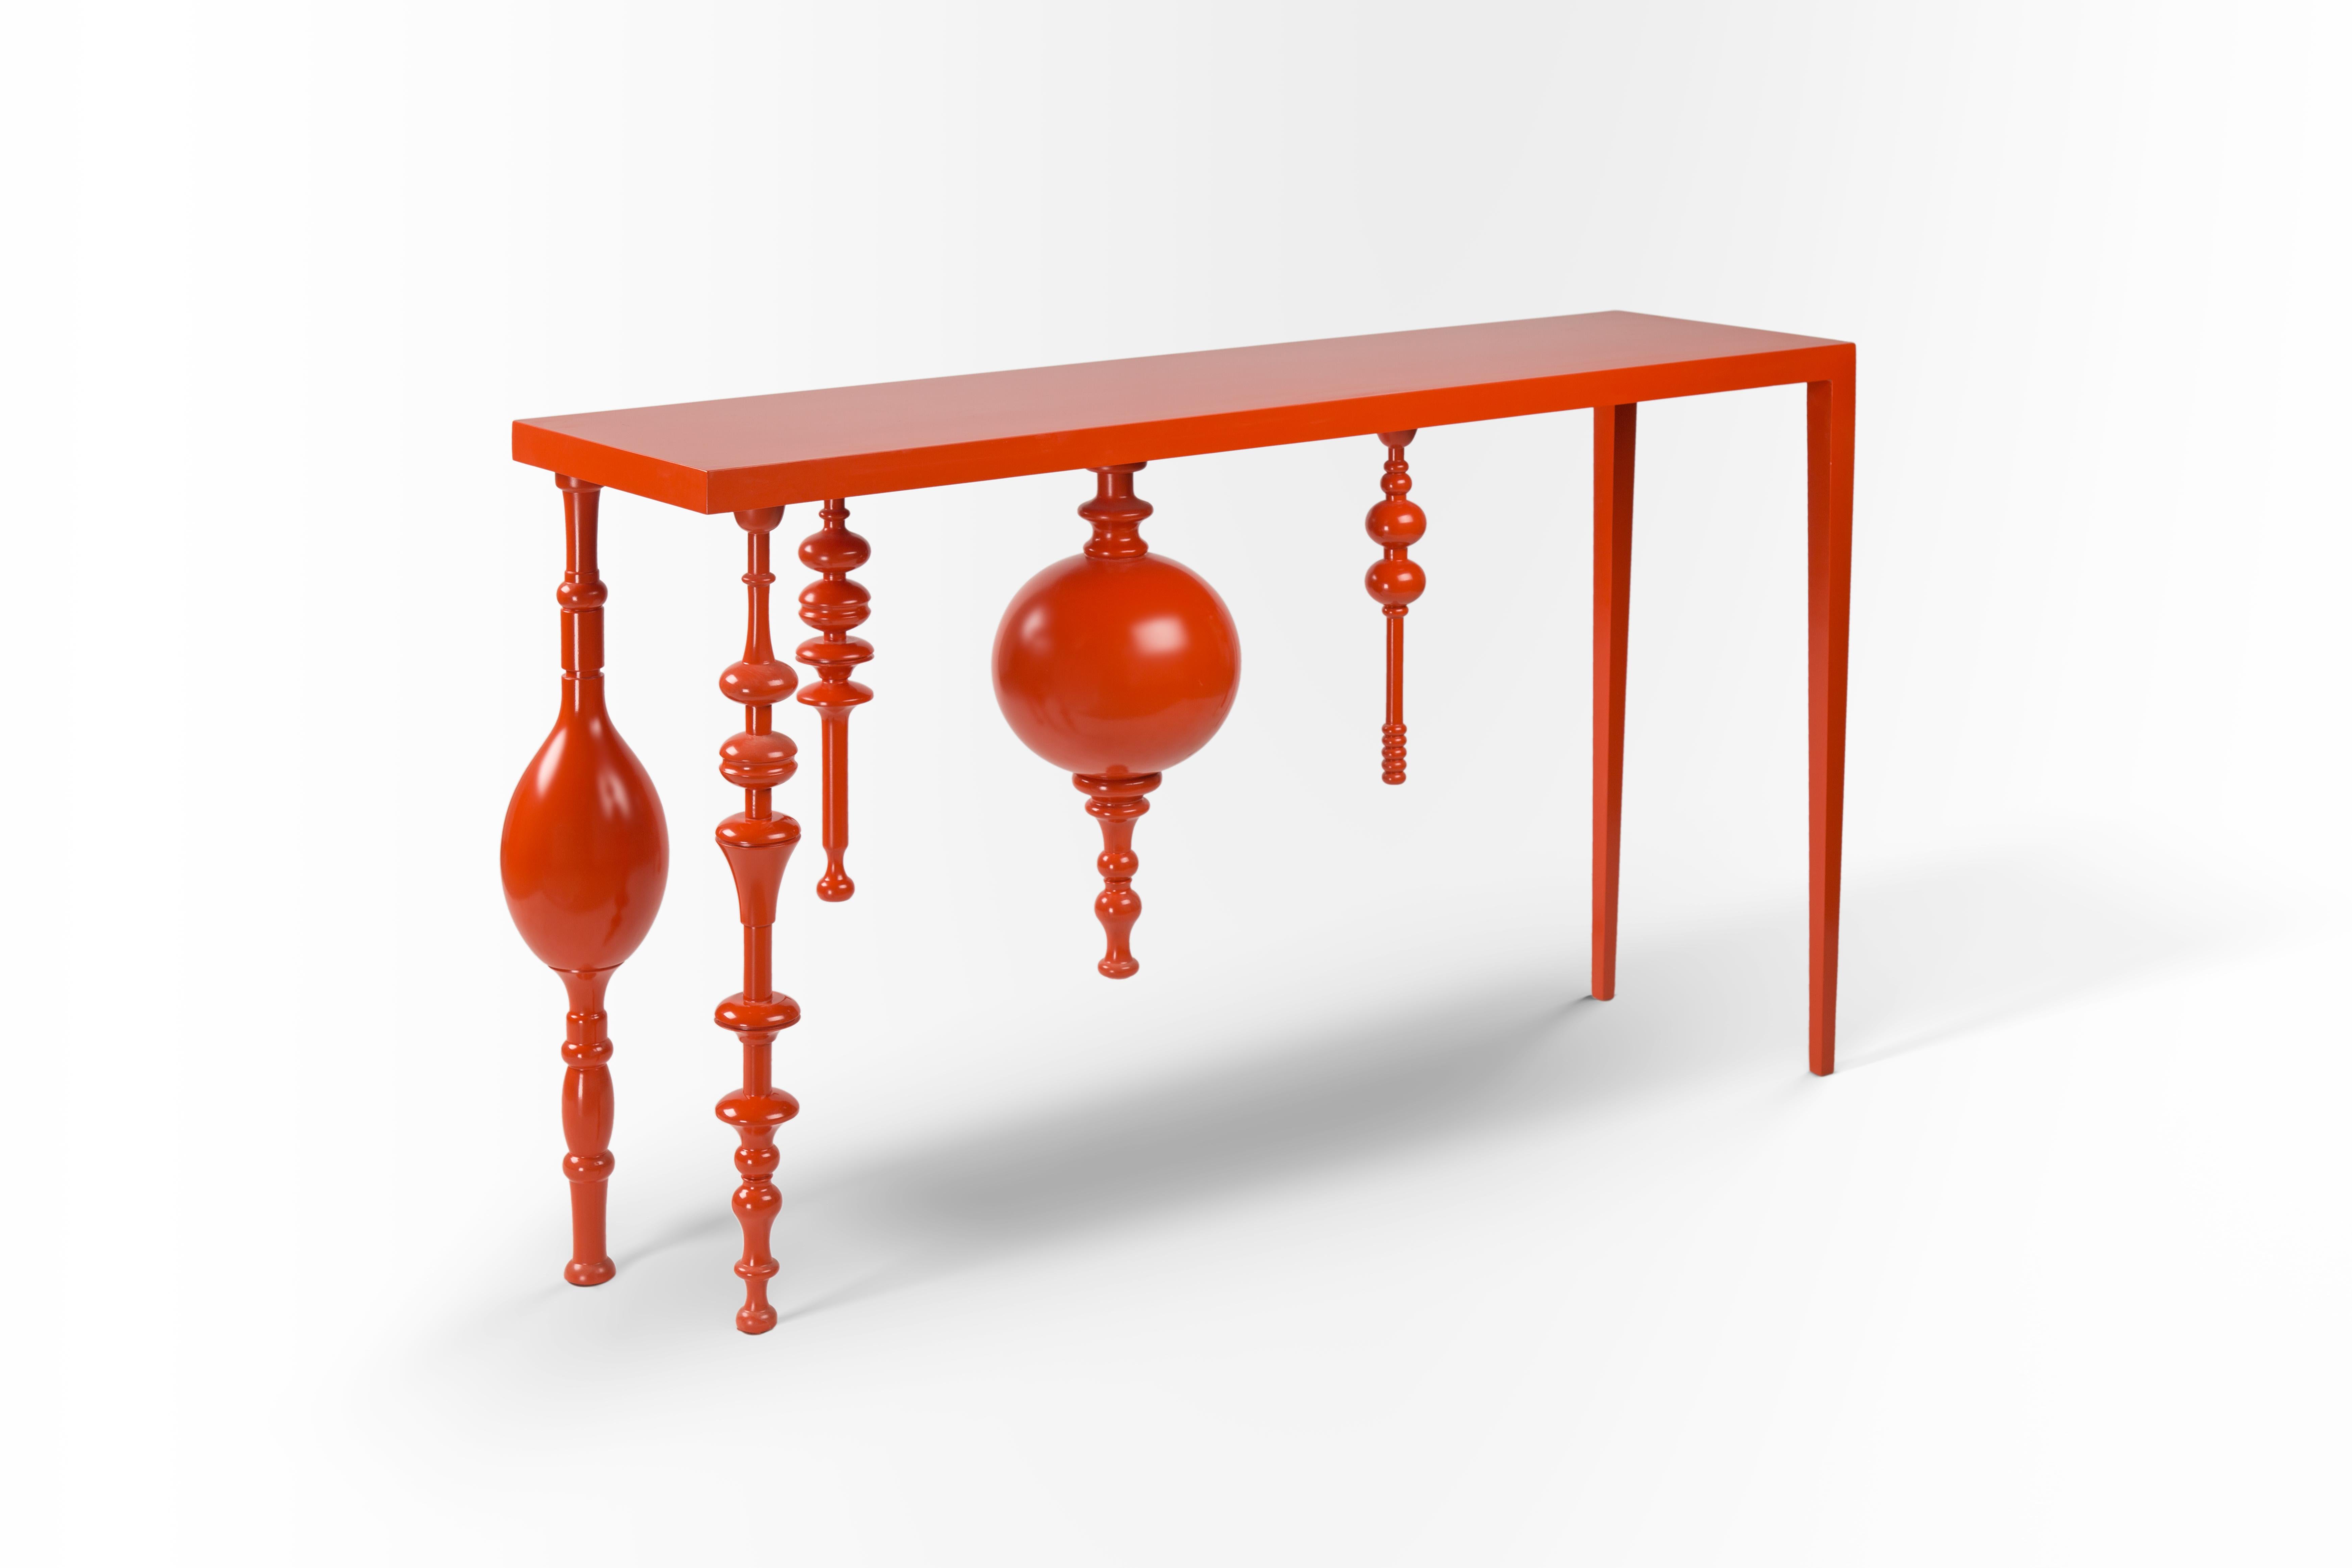 Asymmetric Arabesque, Inspired Console with Lacquered Wood in Bright Orange.
Our Modern Meets Heritage console design nods to traditional Islamic craftsmanship. Its legs are arabesque-inspired and beautifully grooved to reflect our heritage, and